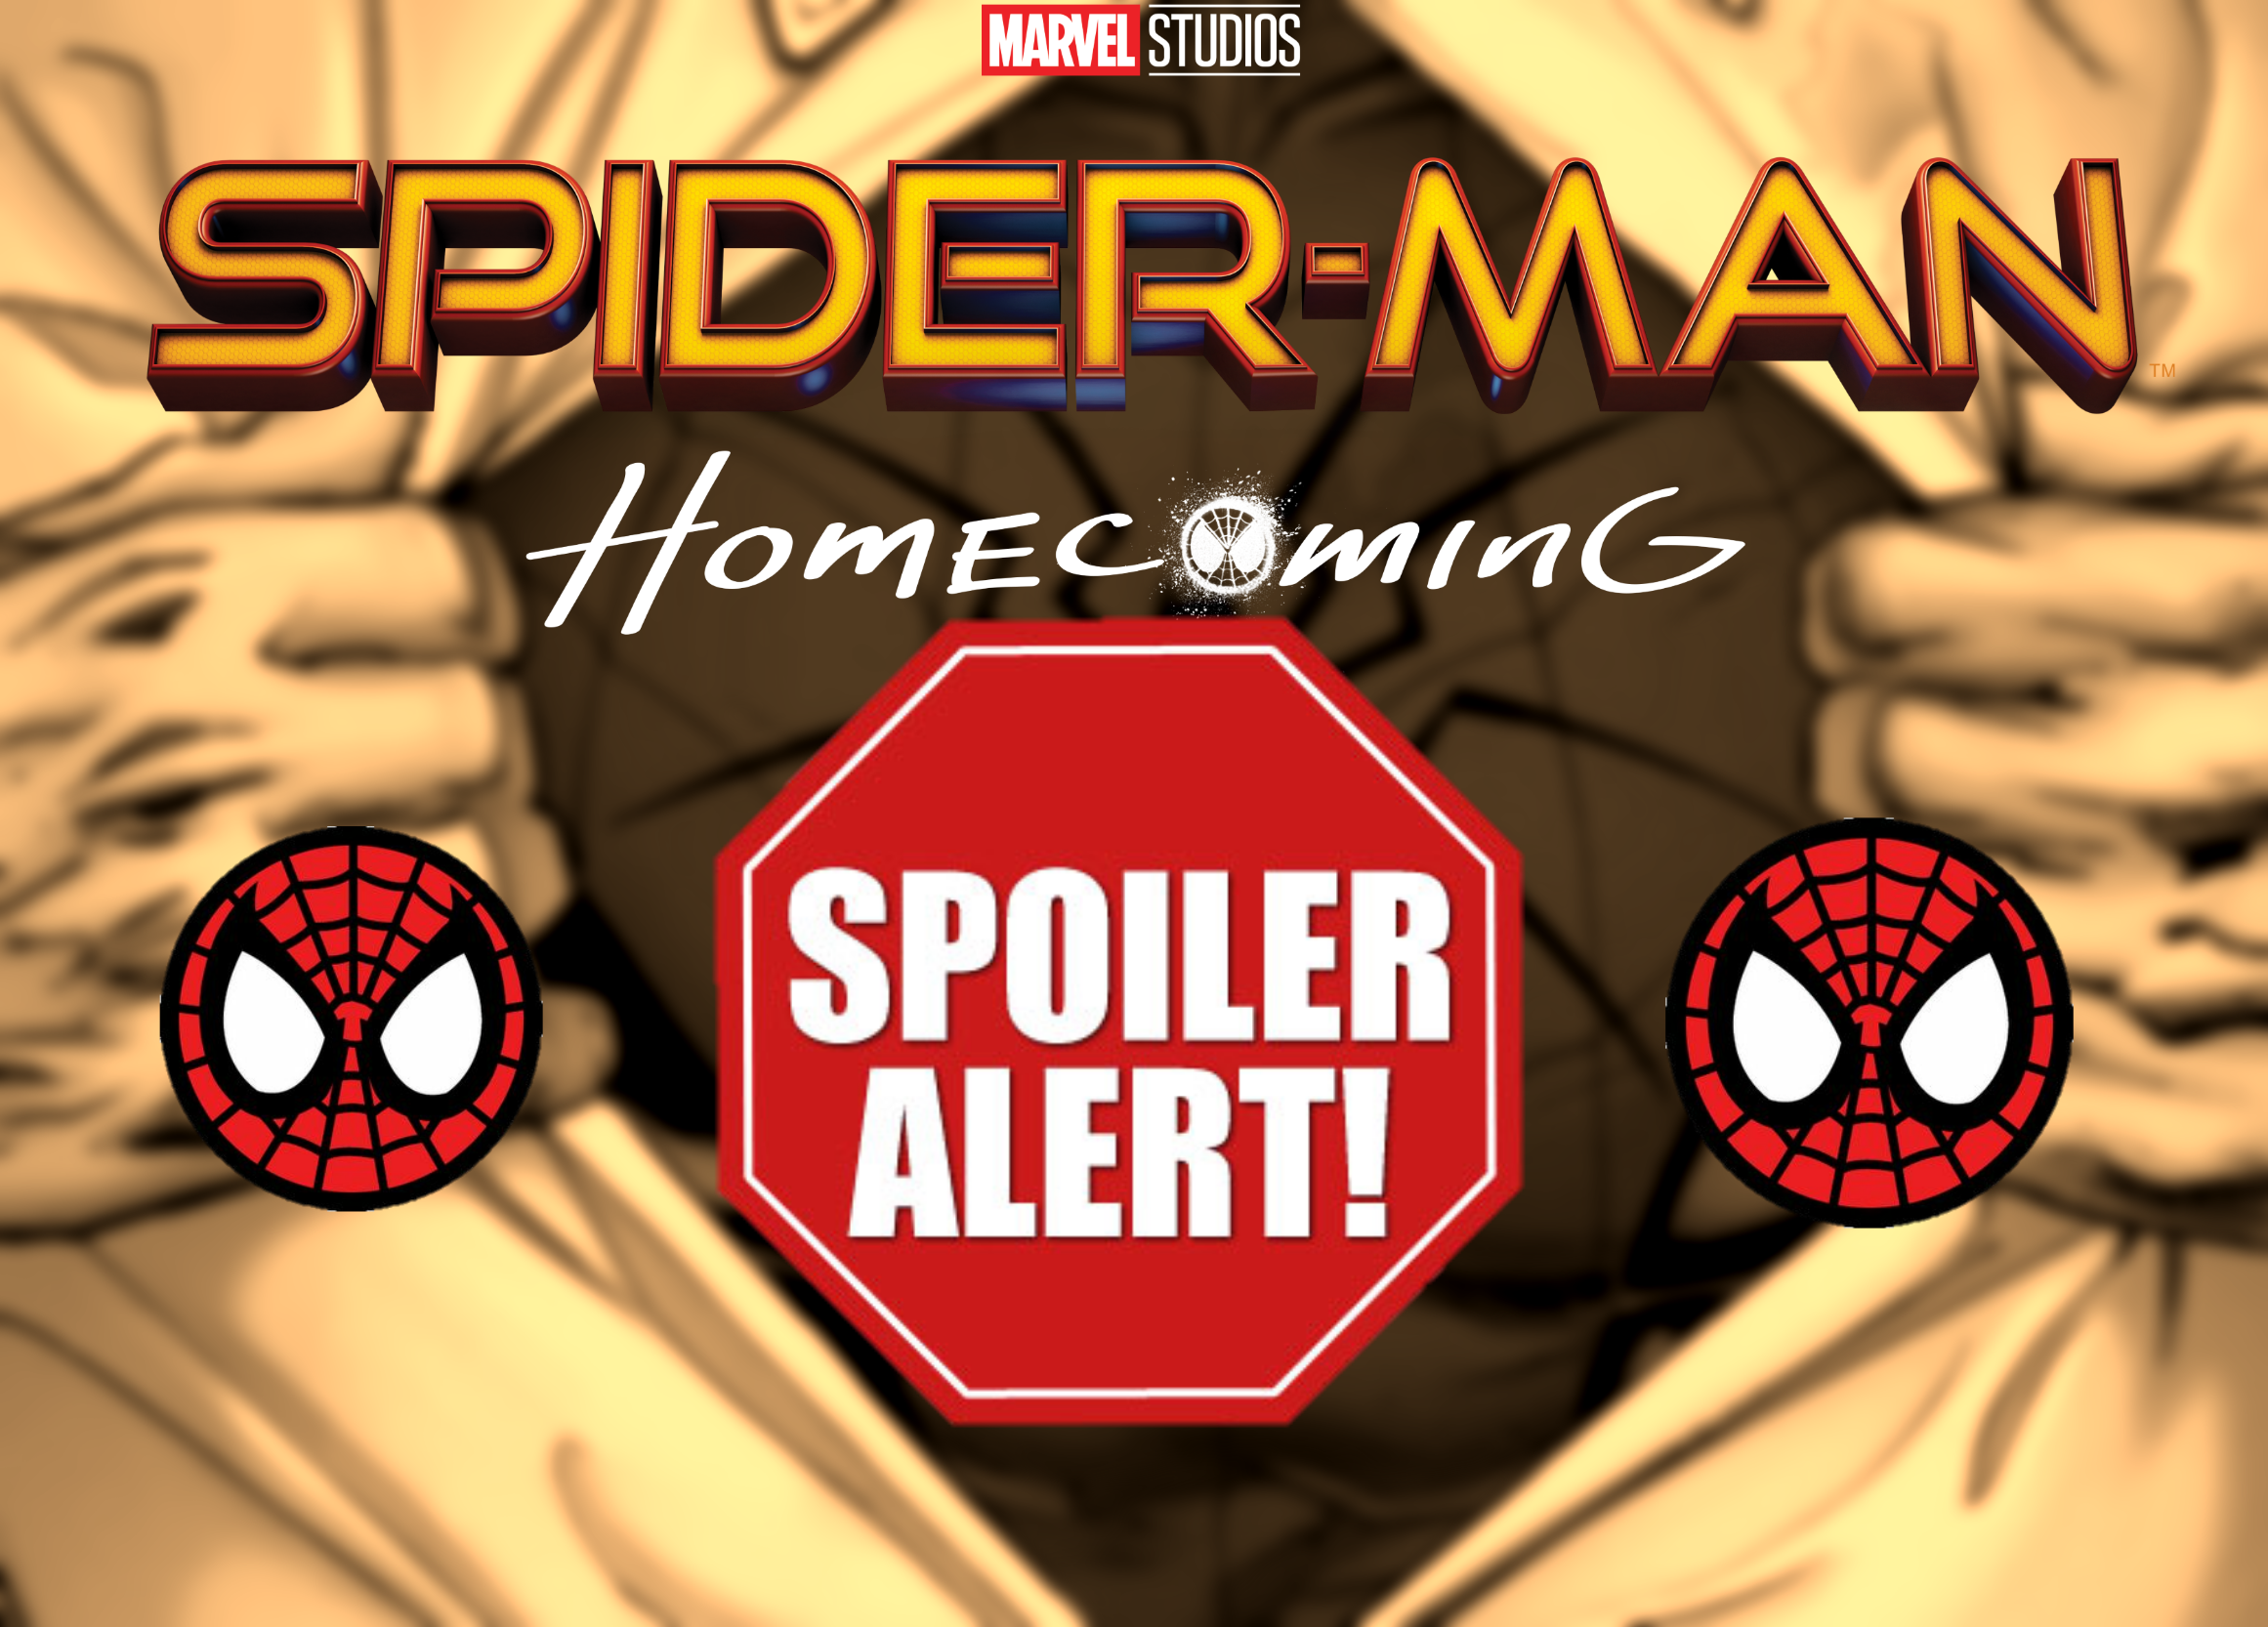 Spider-Man: Homecoming Mid & Post-Credit Scenes Revealed